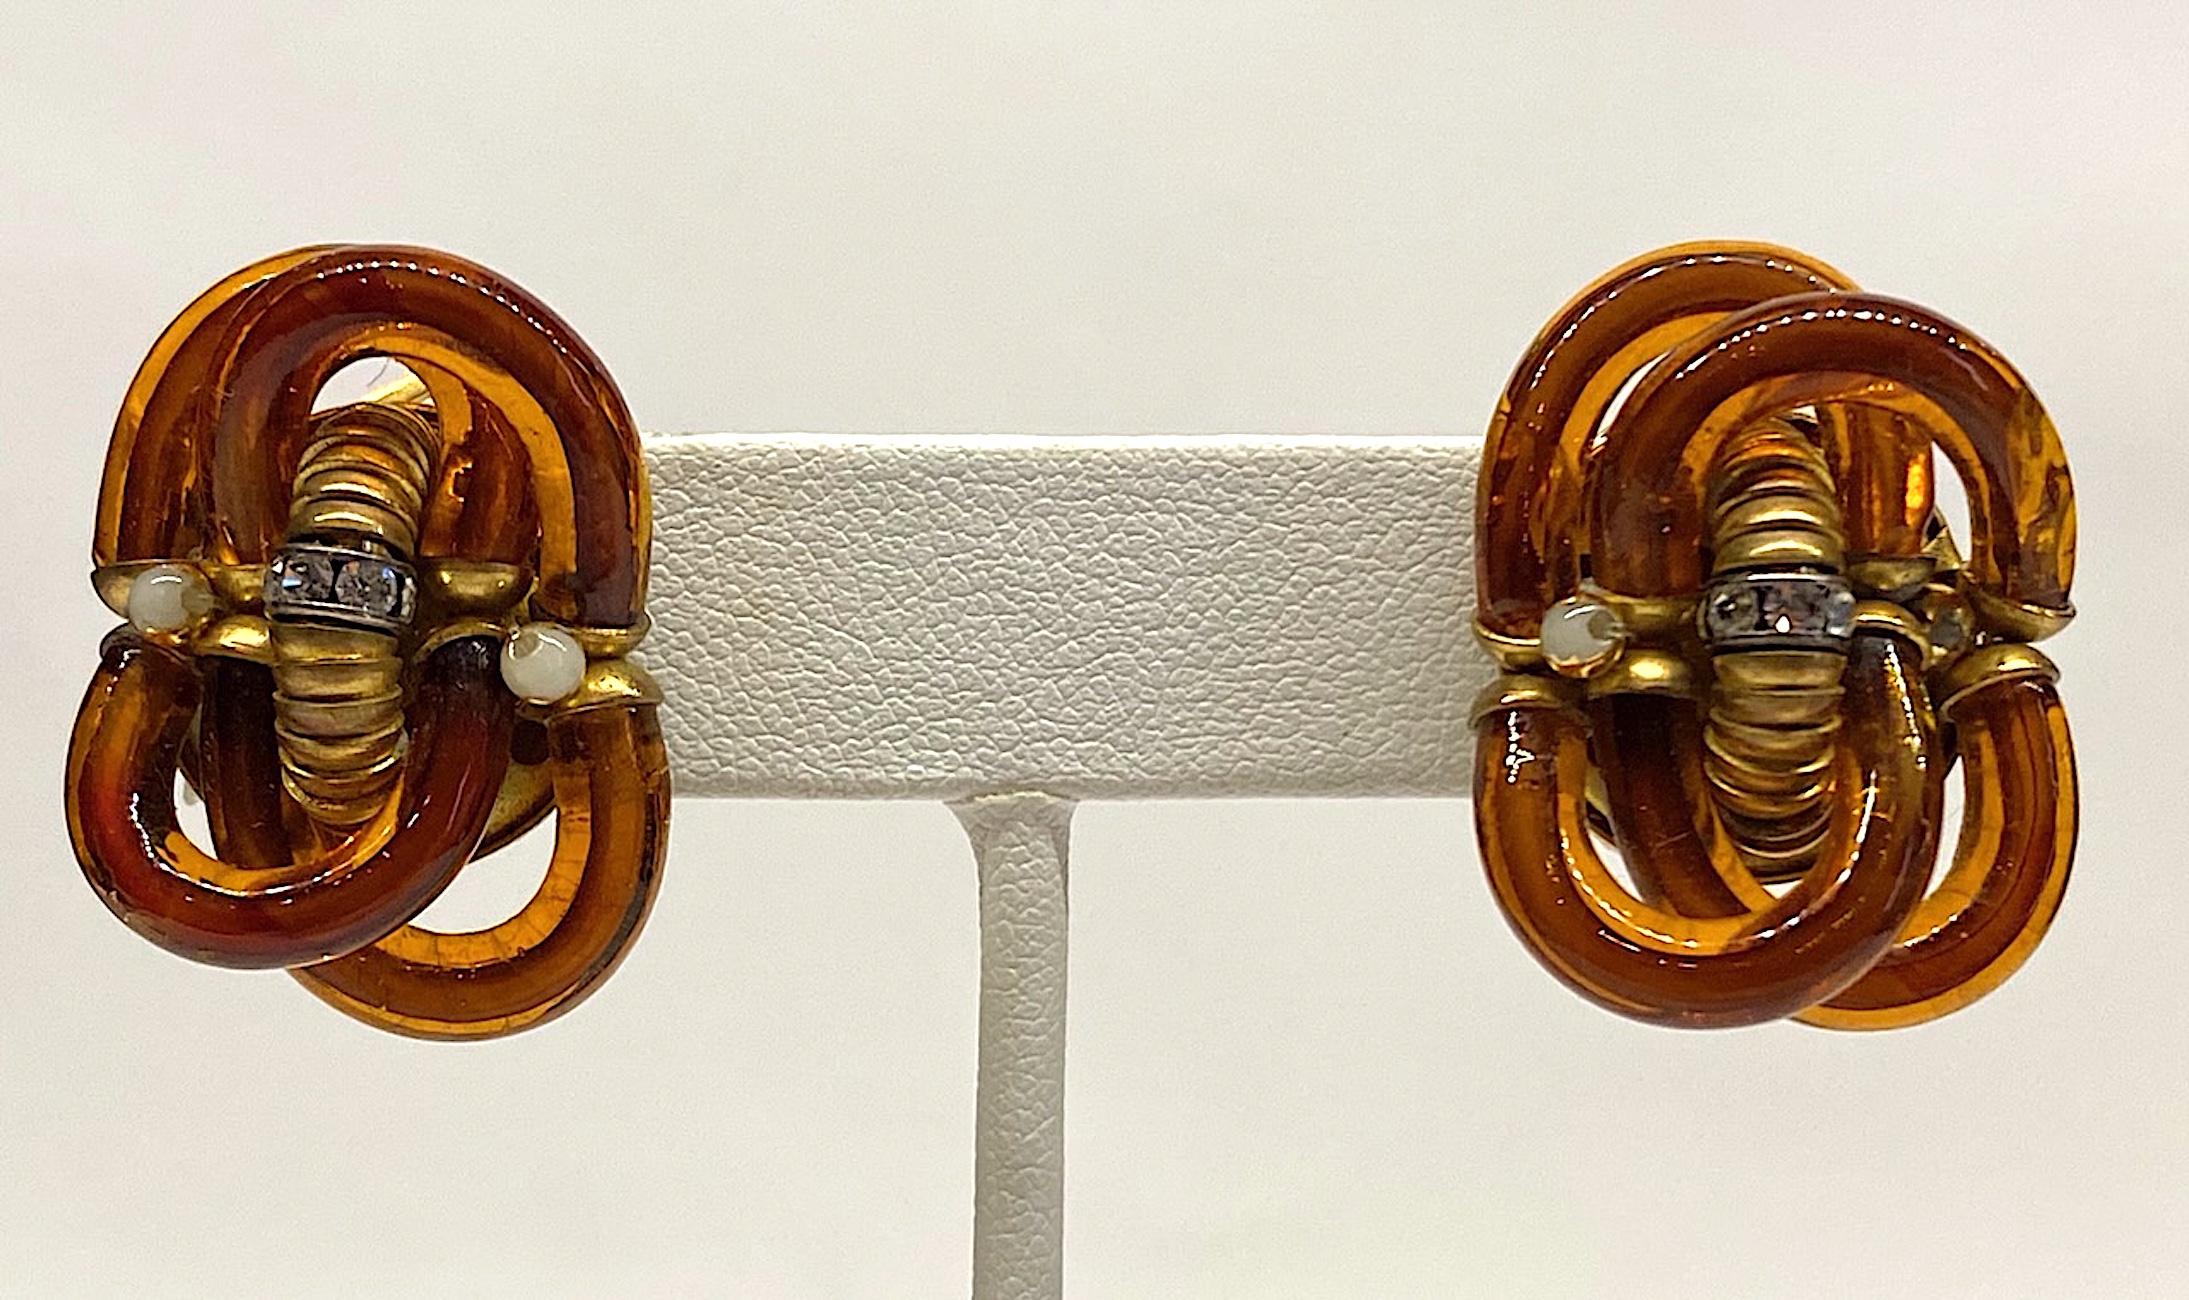 A wonderful pair of hand blown amber glass tube link earrings by famous Italian glass designer Archimede Seguso circa 1960. Each earring measures approximately .88 of an inch wide, 1.13 inches tall and .63 of an inch deep including the clip. The